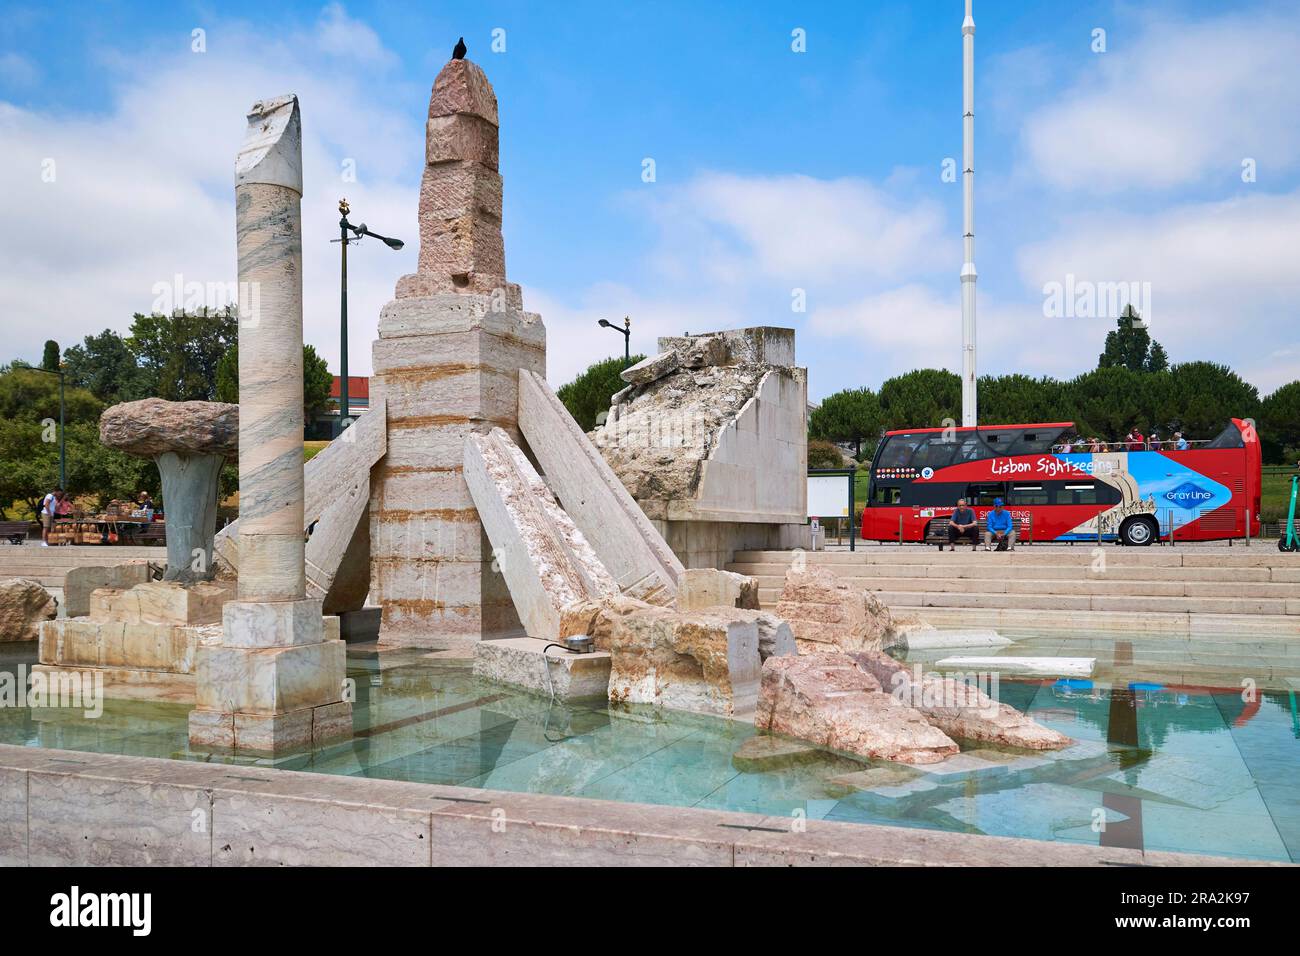 Portugal, Lisbon, Parque Eduardo VII, Monument of the 25th of April Revolution, made by Joao Cutileiro, which commemorates the day of the Carnation Revolution of 1974 Stock Photo